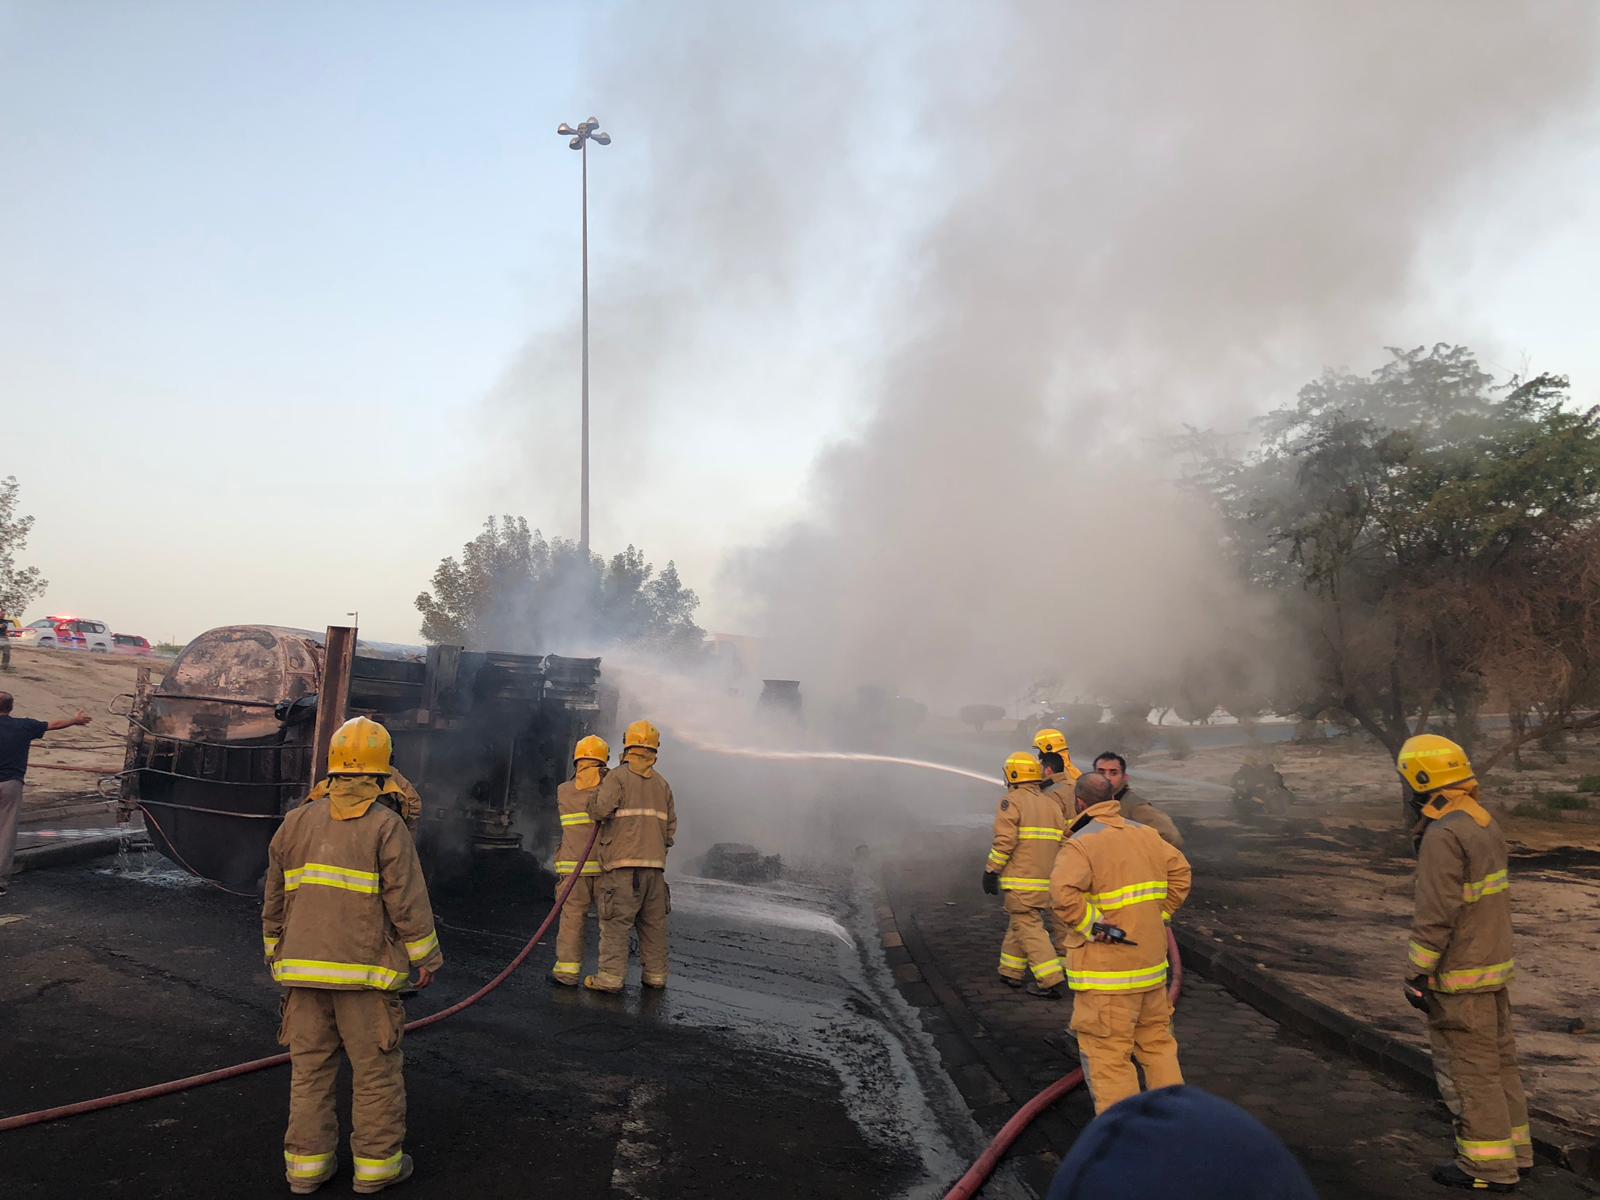 Firefighters put out a fire in a patrol tanker